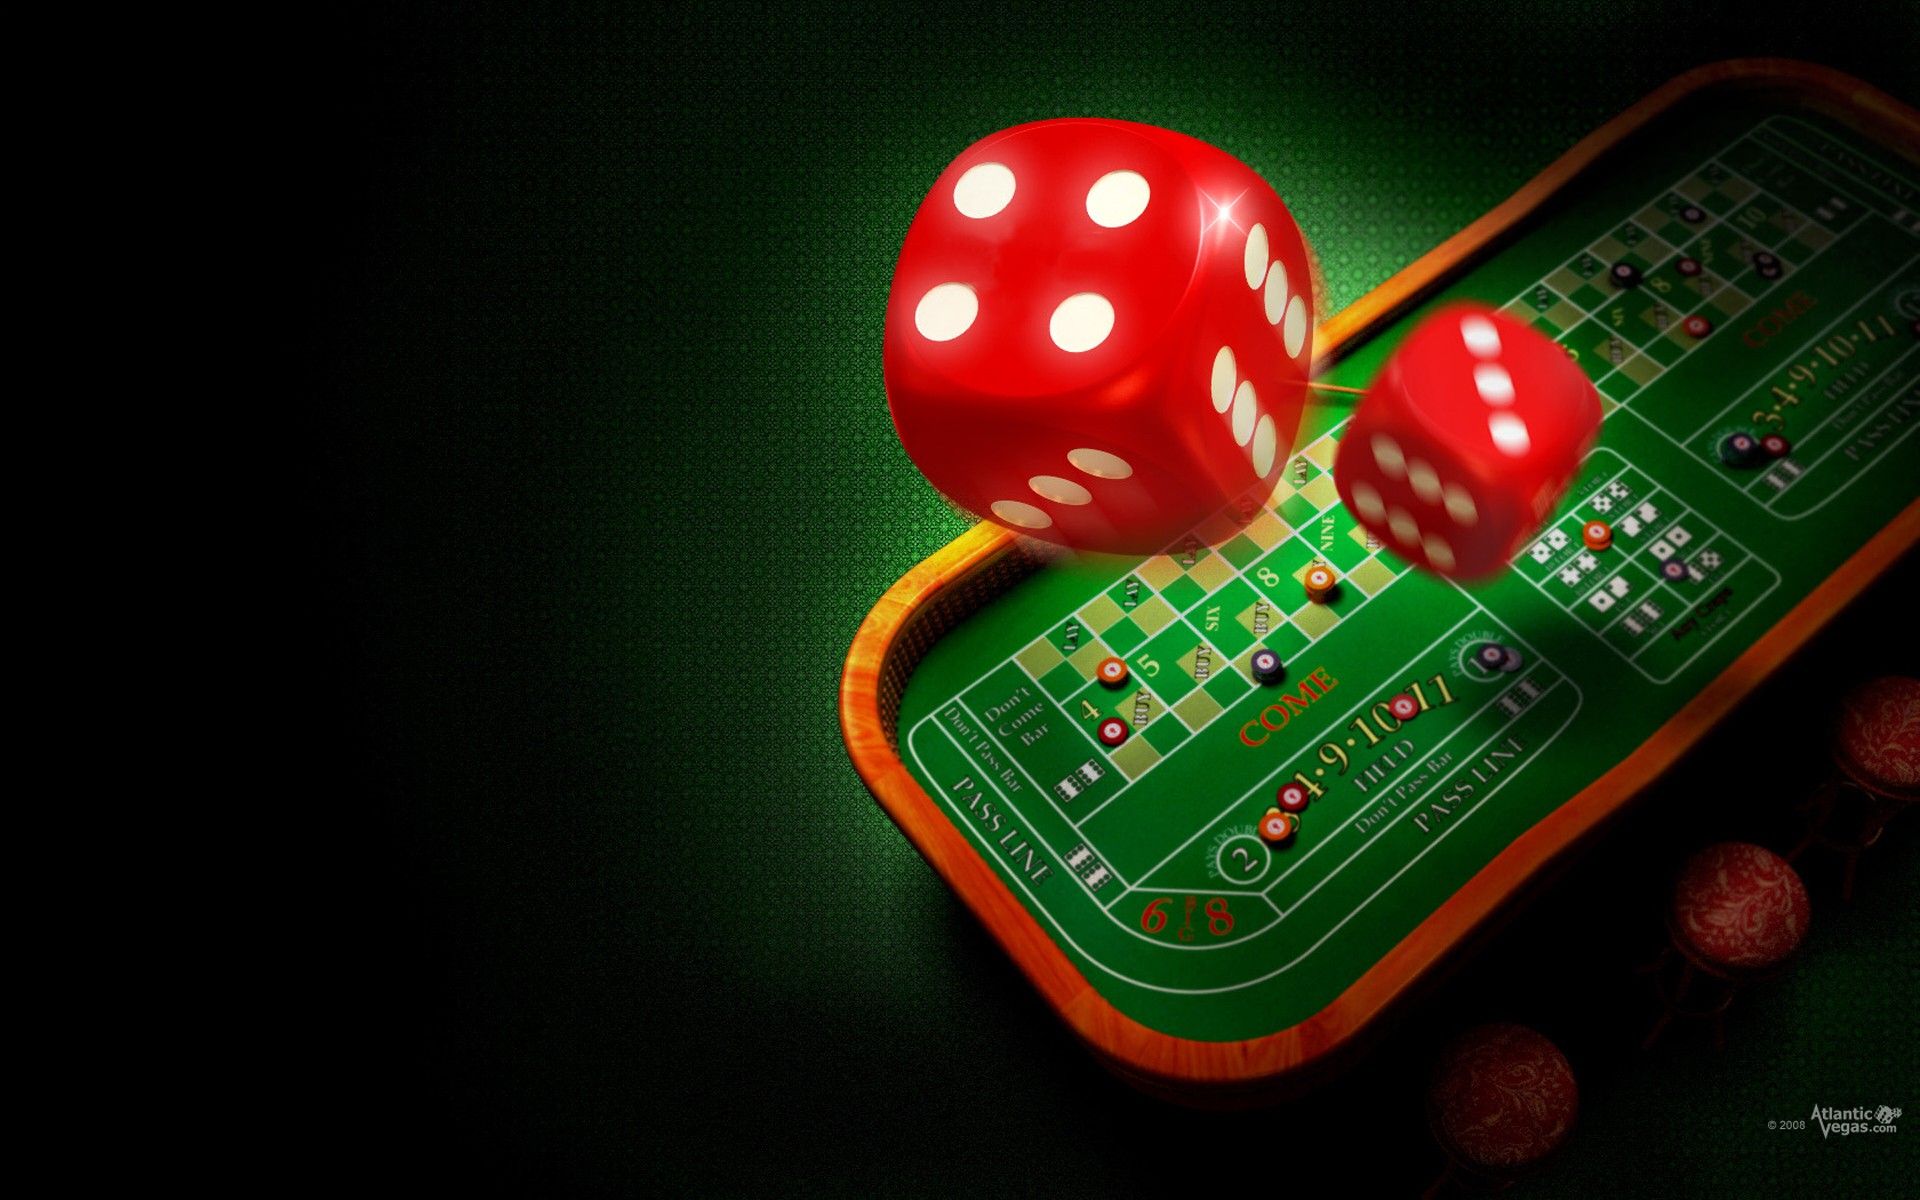 Get the answer to the most common betting questions and problems at the On Casino (더온카지노).